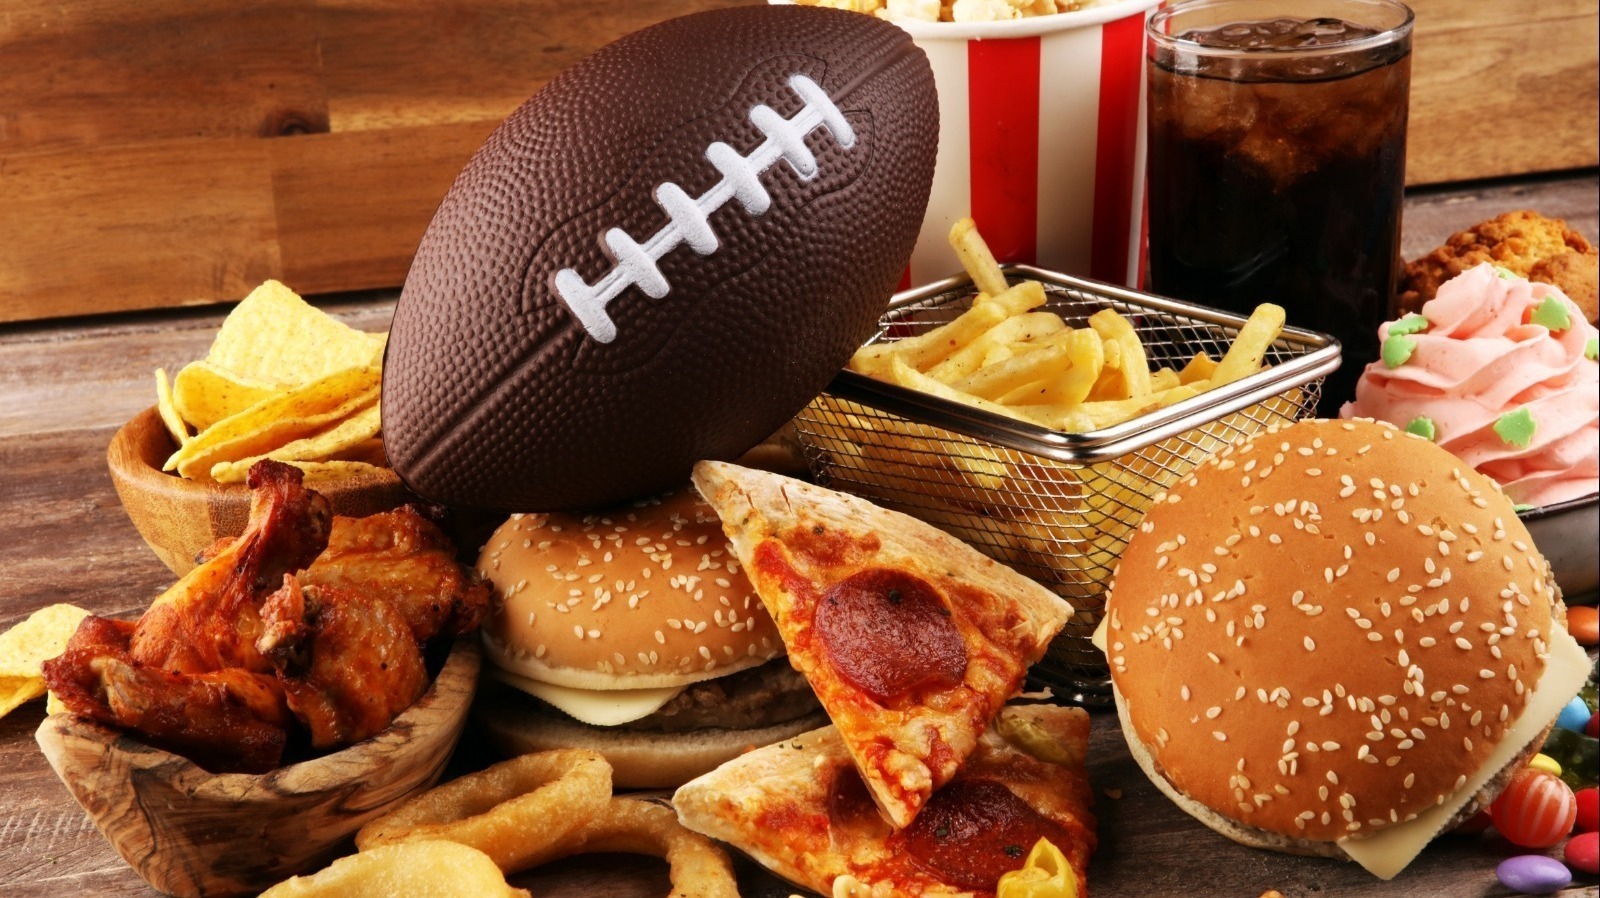 Super Bowl parties offer major celebrities, gourmet food and experiences —  plenty to brag about to friends!